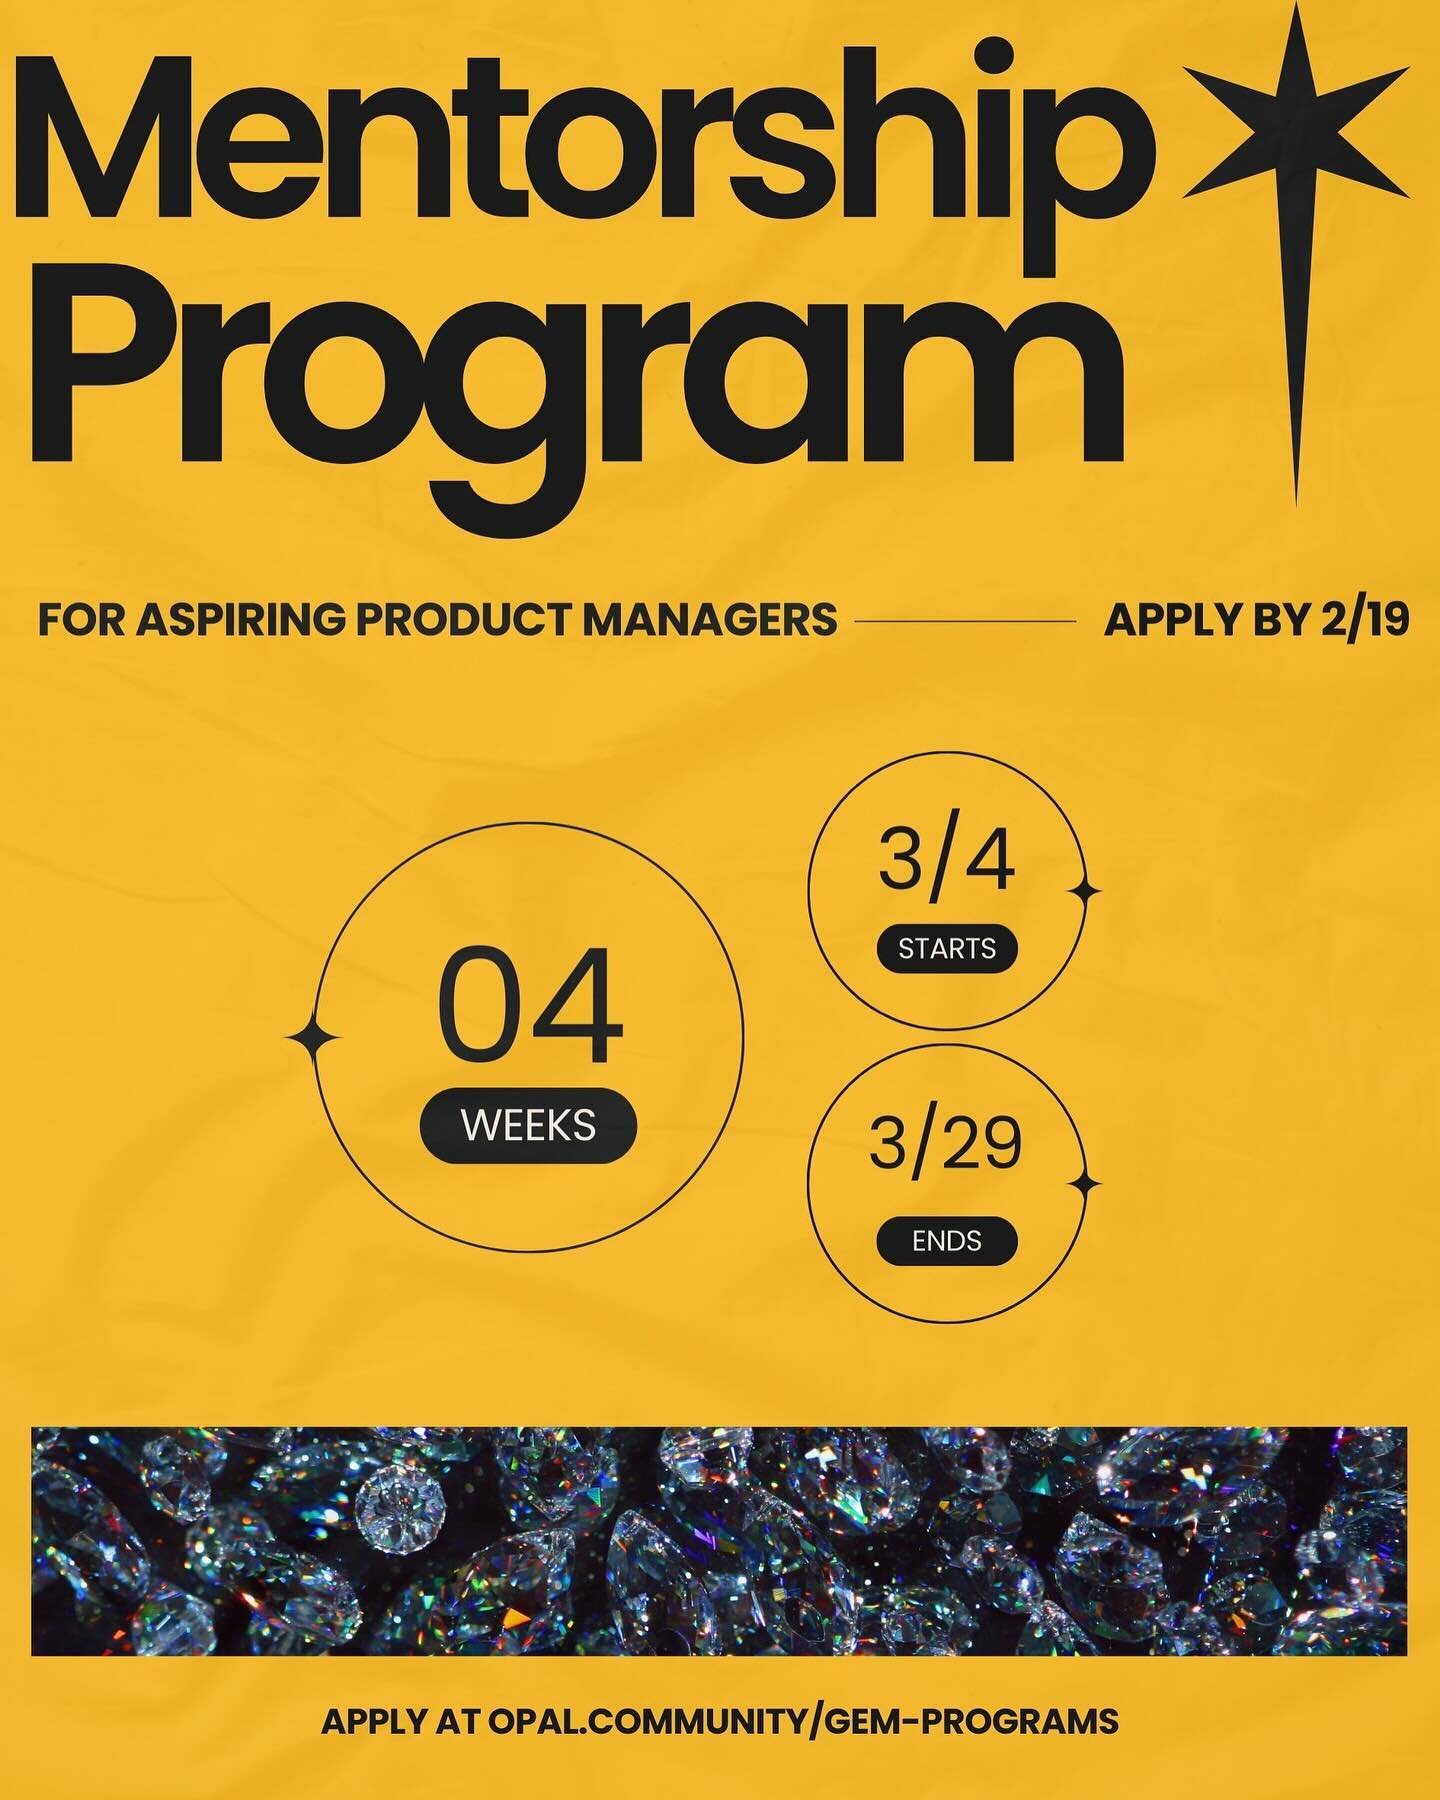 Our first GEM Program (starting March 4th) is for&hellip; 🥁&hellip;ASPIRING PRODUCT MANAGERS. First-generation students get priority in the application process, but EVERYONE can apply! 

Want to join or learn more about this 4-week, fully virtual pr